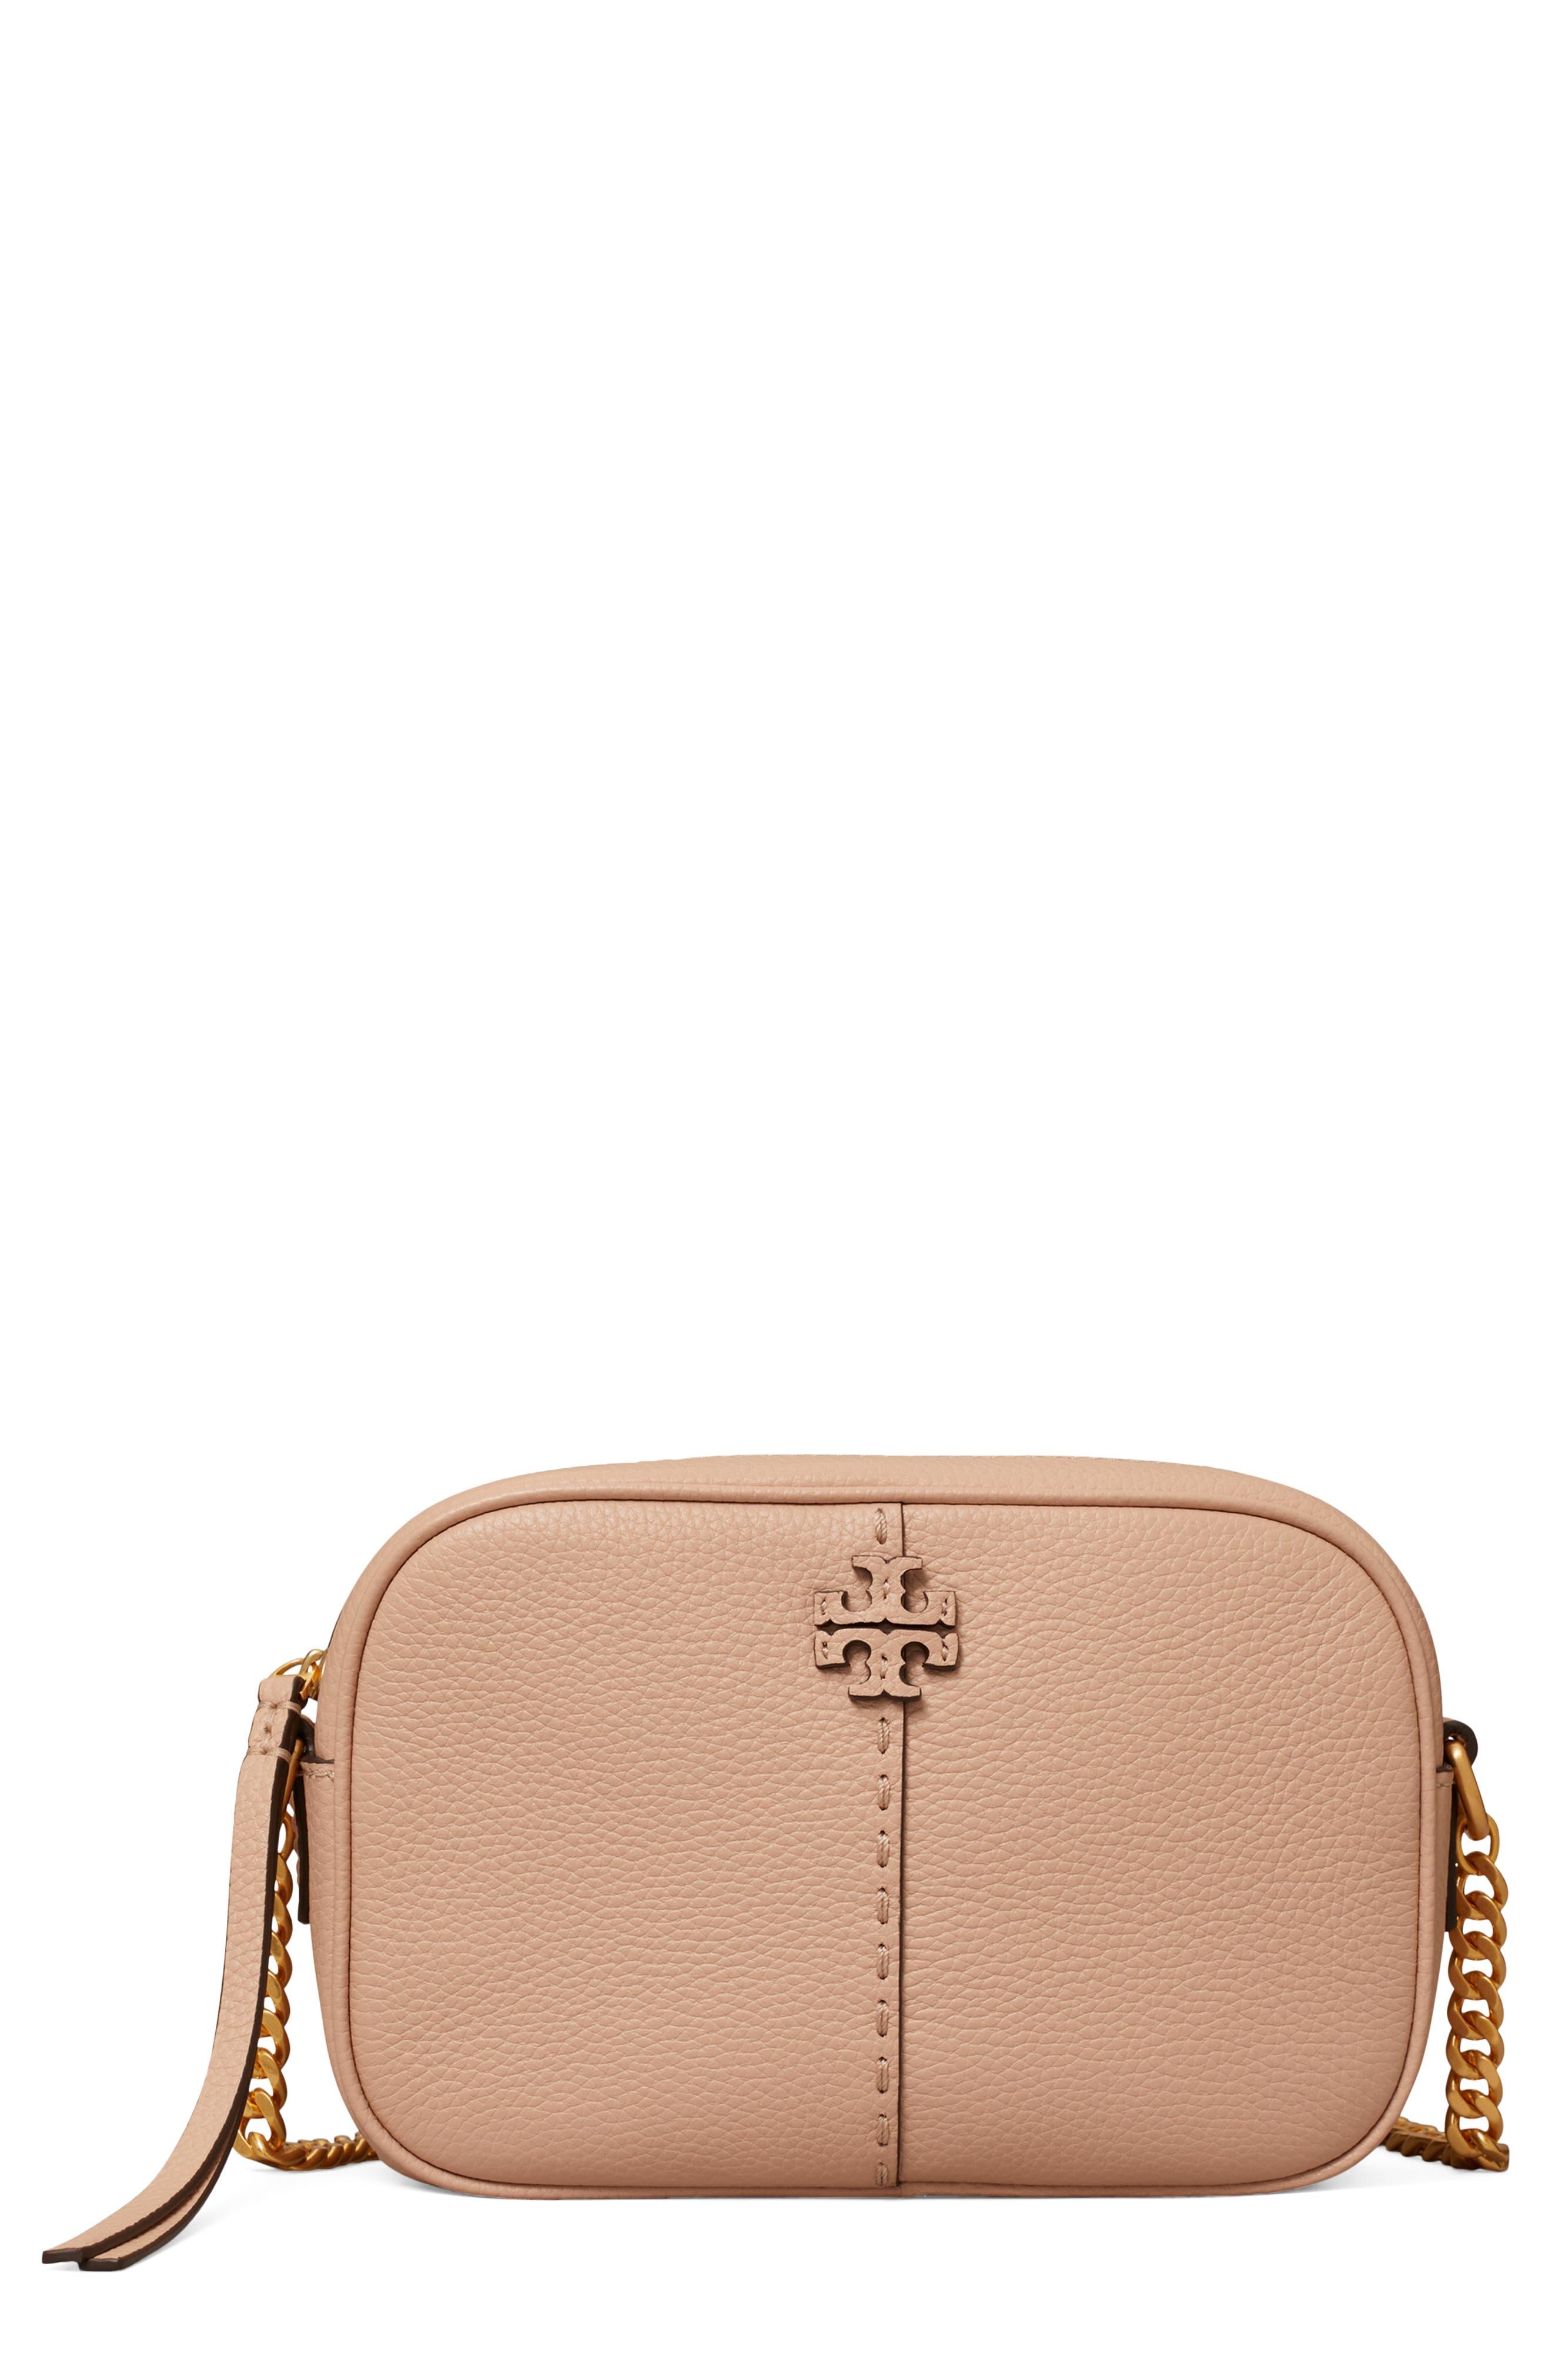 Tory Burch Mcgraw Leather Camera Bag in Natural | Lyst